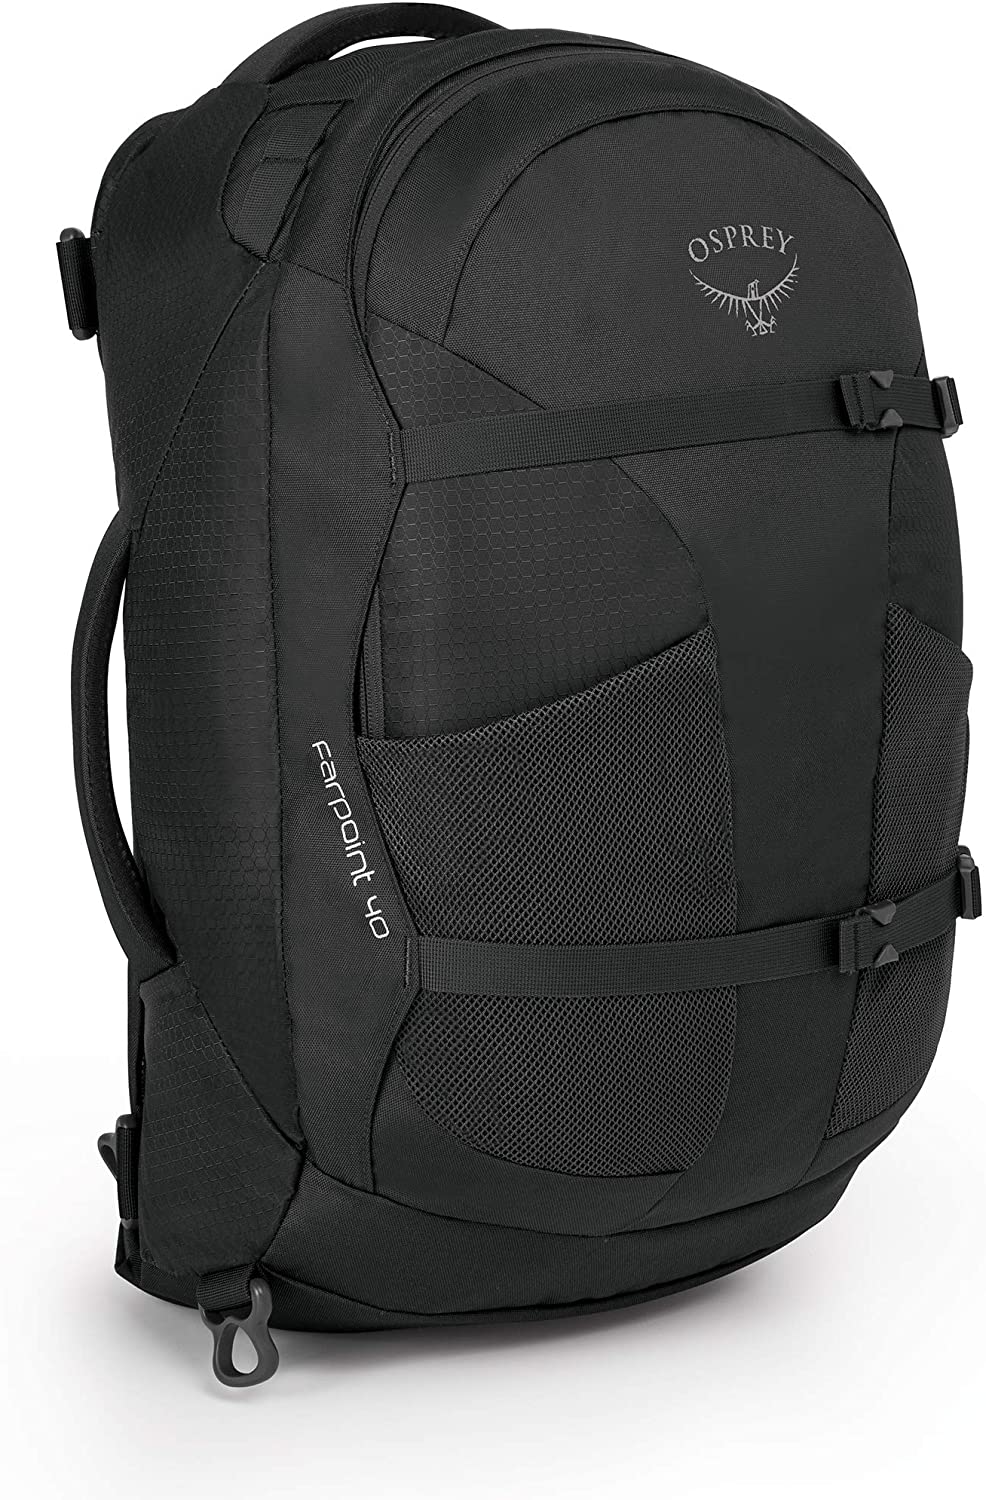 Osprey Farpoint 40 Travel Pack - image 1 of 4